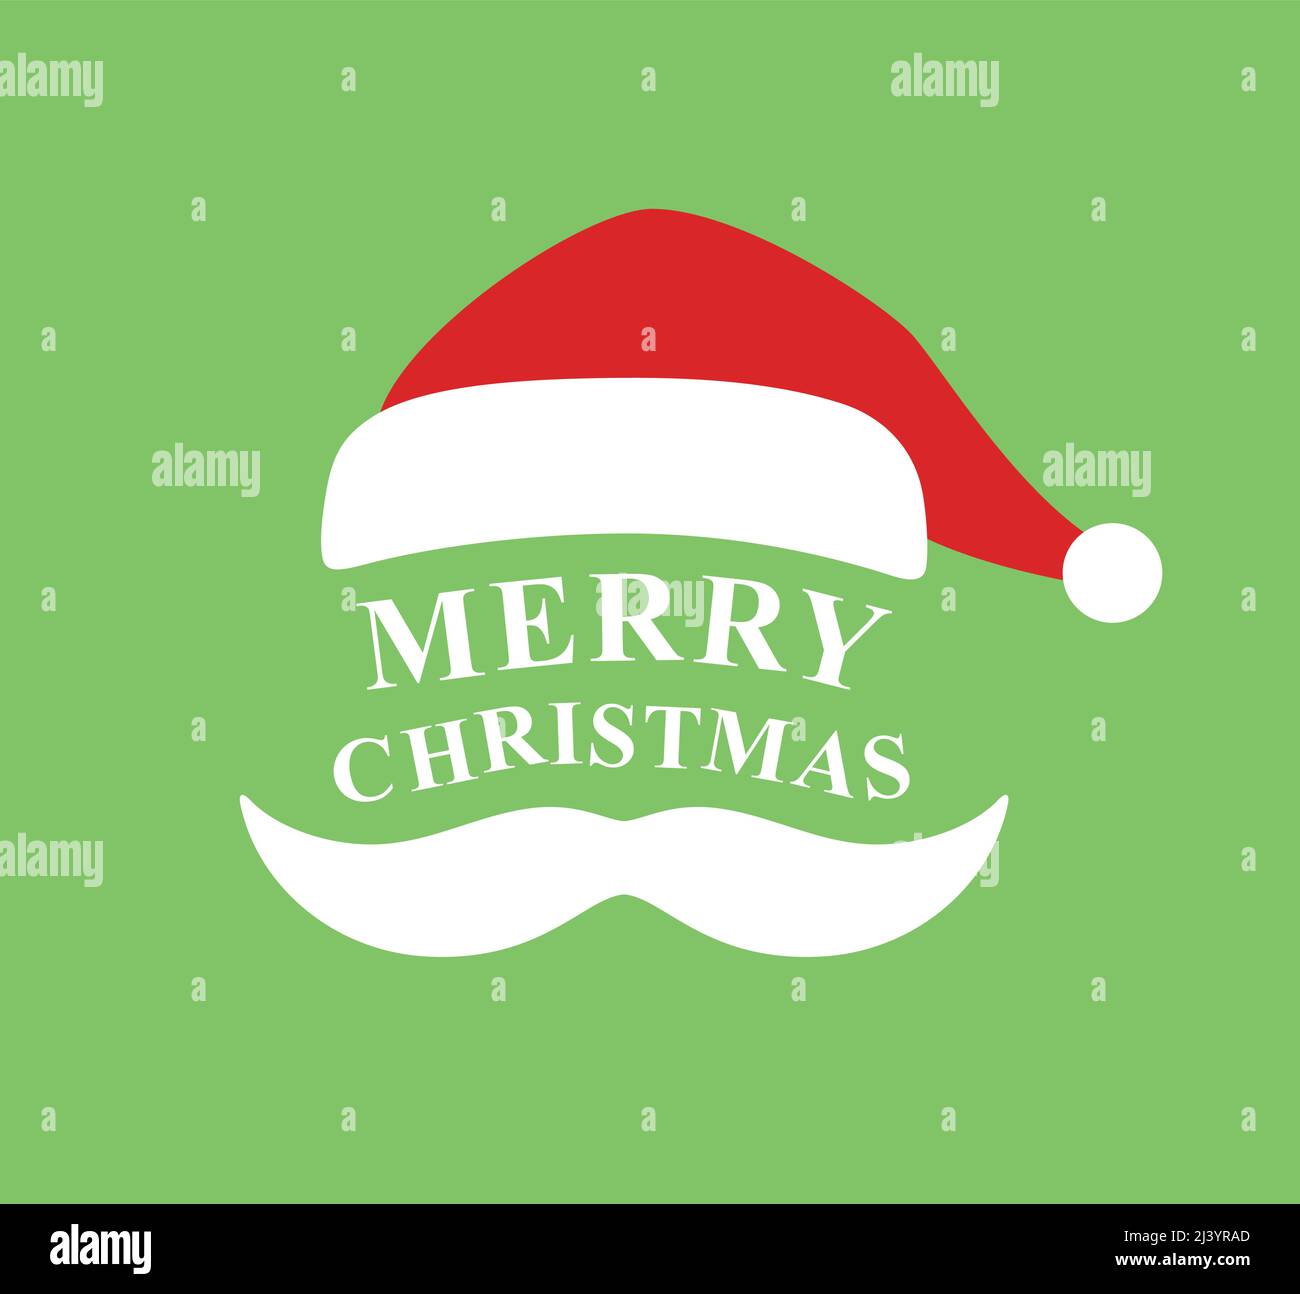 Merry Christmas concept with Christmas hat and Santa white beard Stock Vector